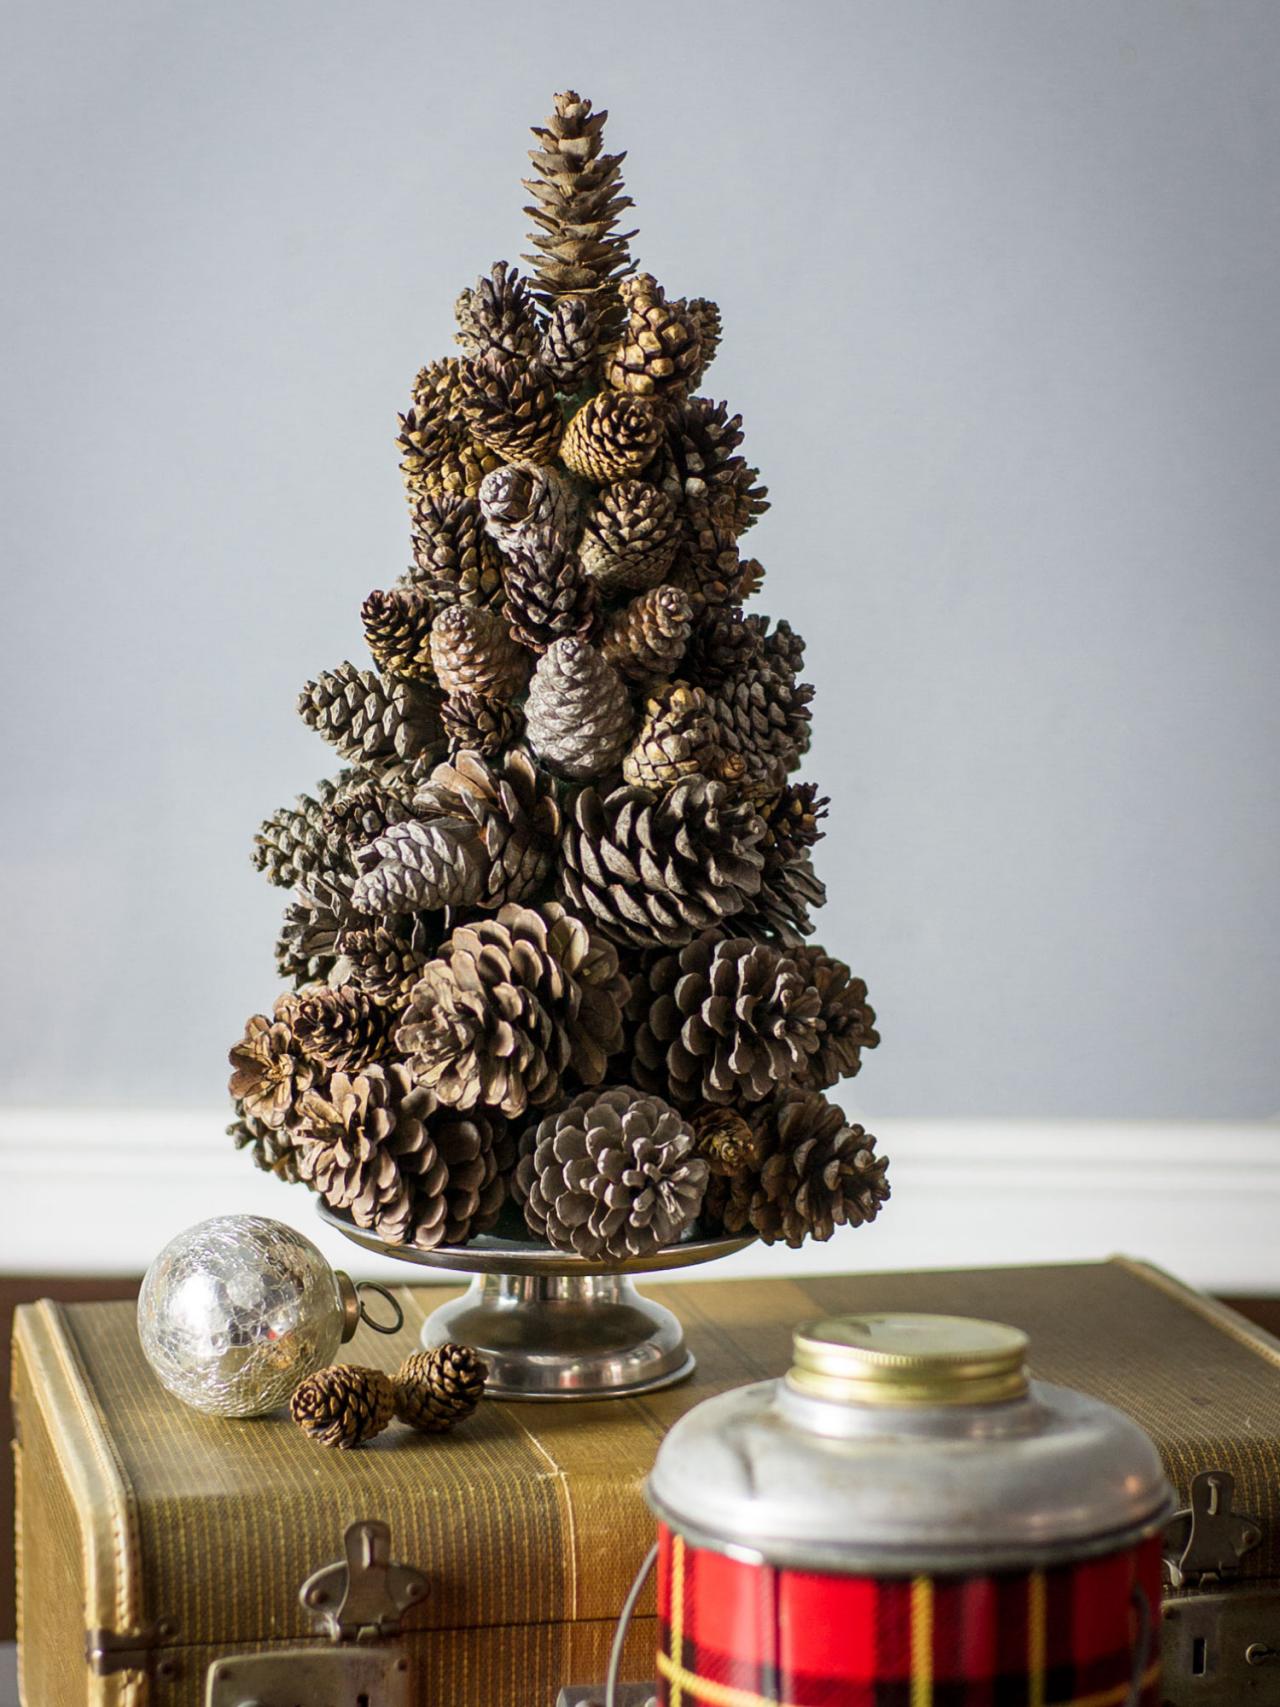 Pinecone Crafts and Decorations You'll Want to Try | Midwest Living